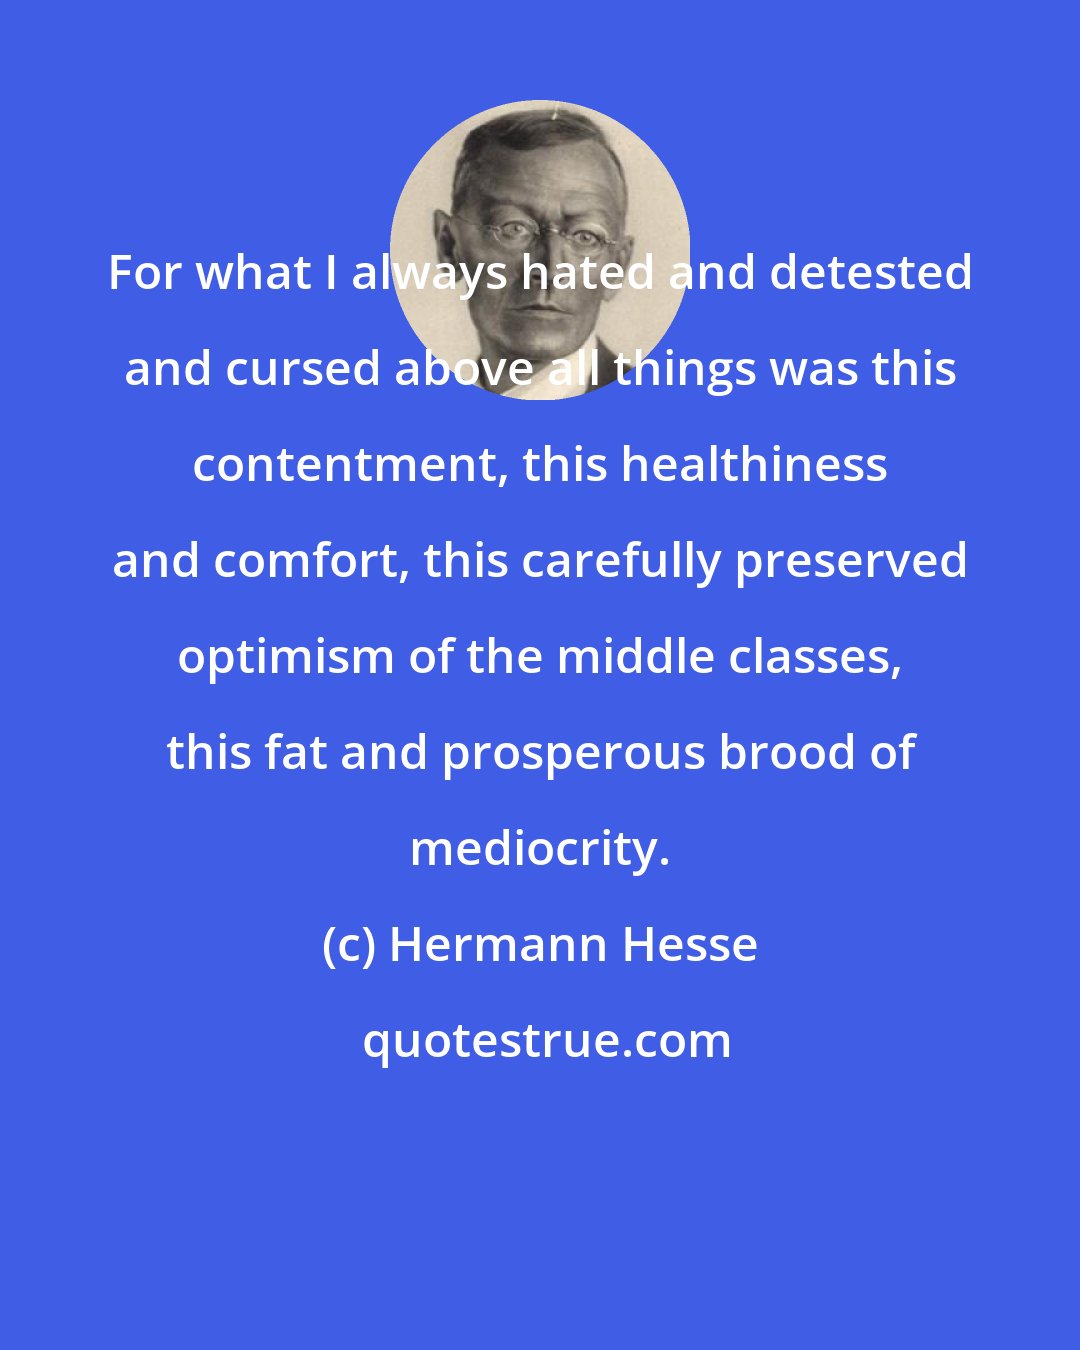 Hermann Hesse: For what I always hated and detested and cursed above all things was this contentment, this healthiness and comfort, this carefully preserved optimism of the middle classes, this fat and prosperous brood of mediocrity.